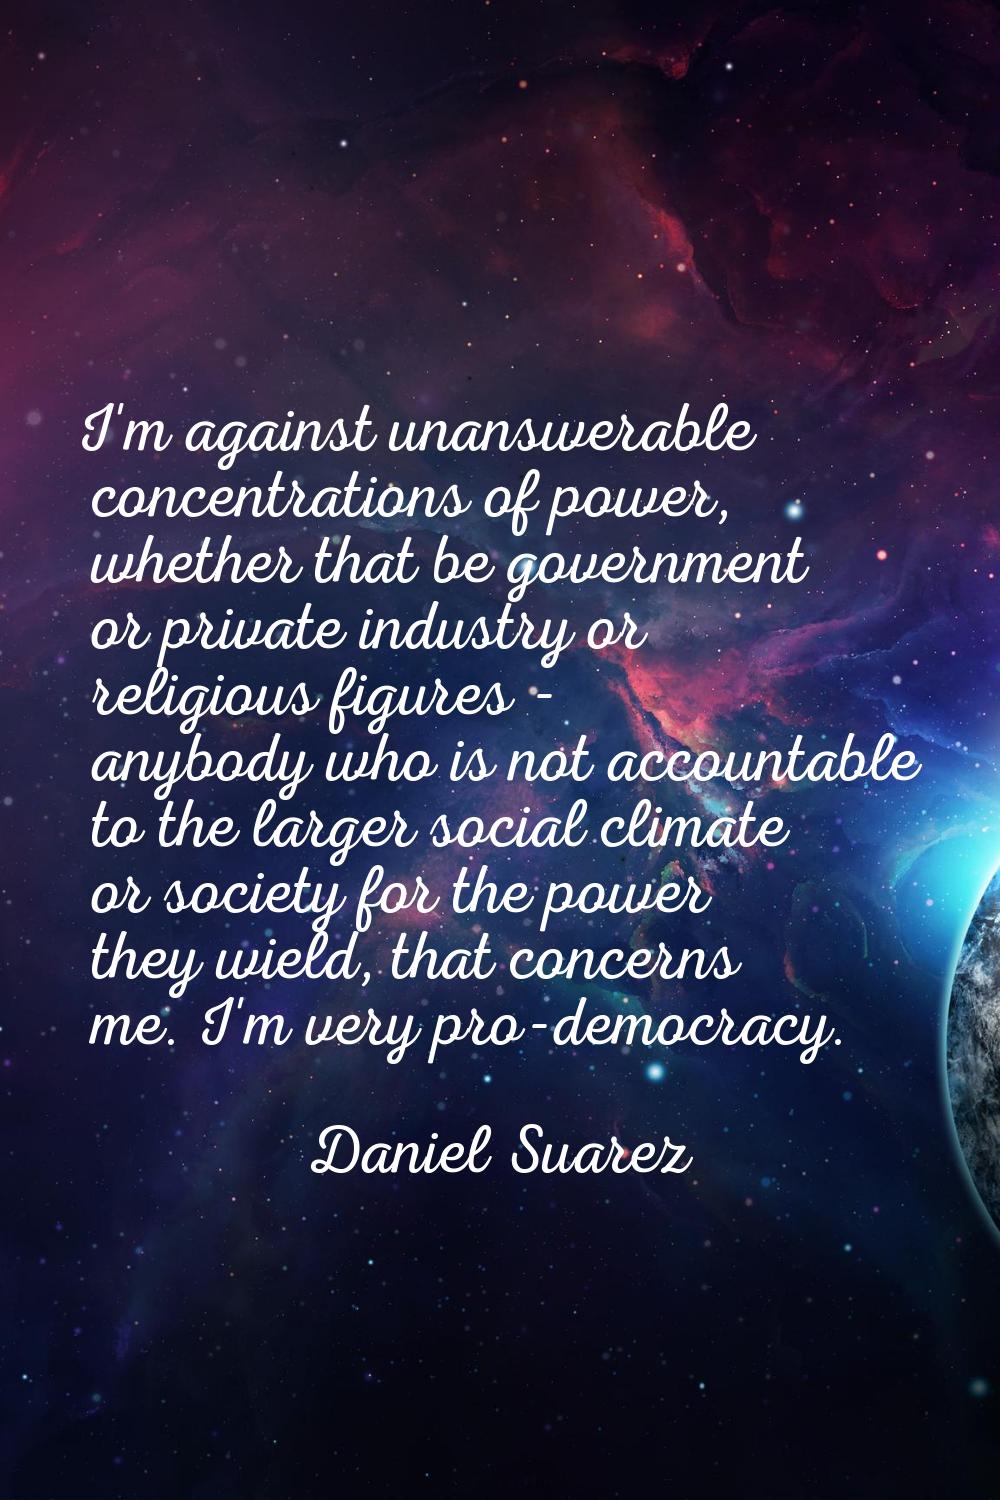 I'm against unanswerable concentrations of power, whether that be government or private industry or